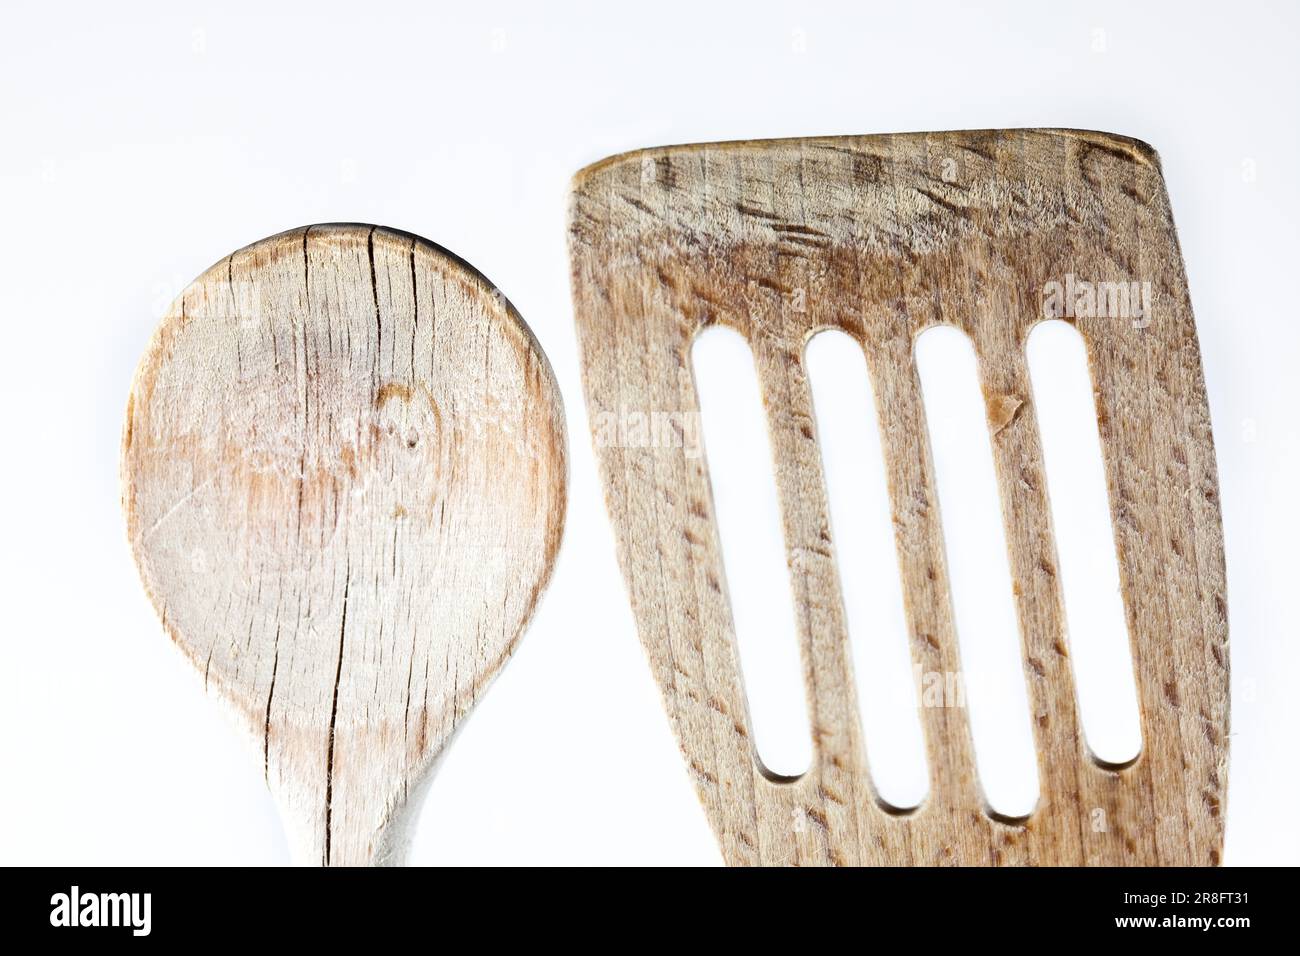 Wooden spoon detail shot against white background Stock Photo